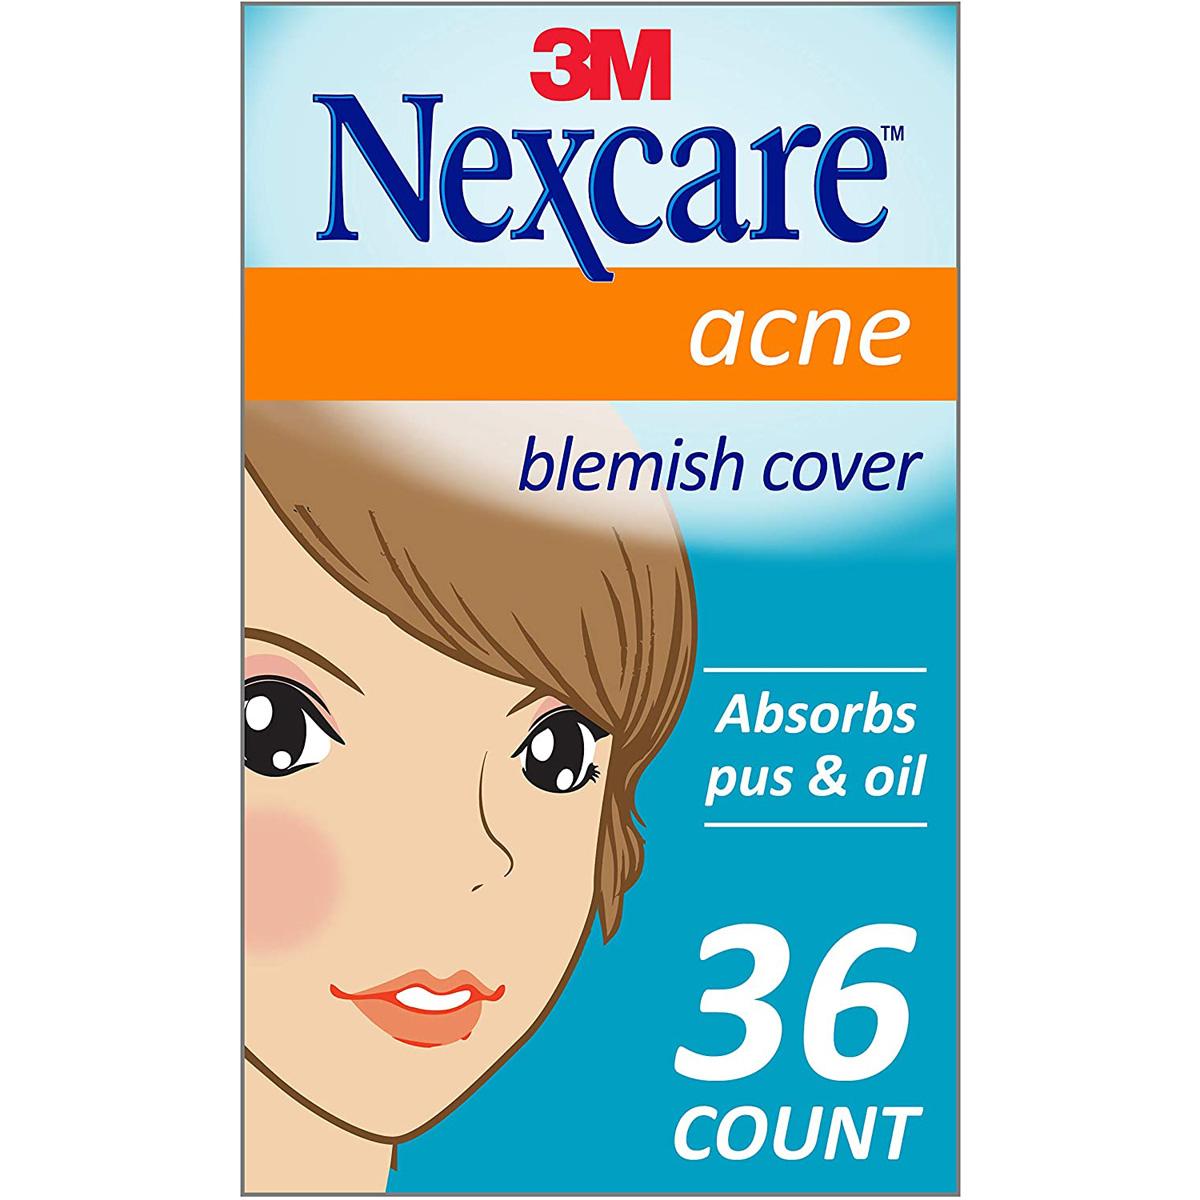 36 Nexcare Absorbing Acne Covers for $4.18 Shipped